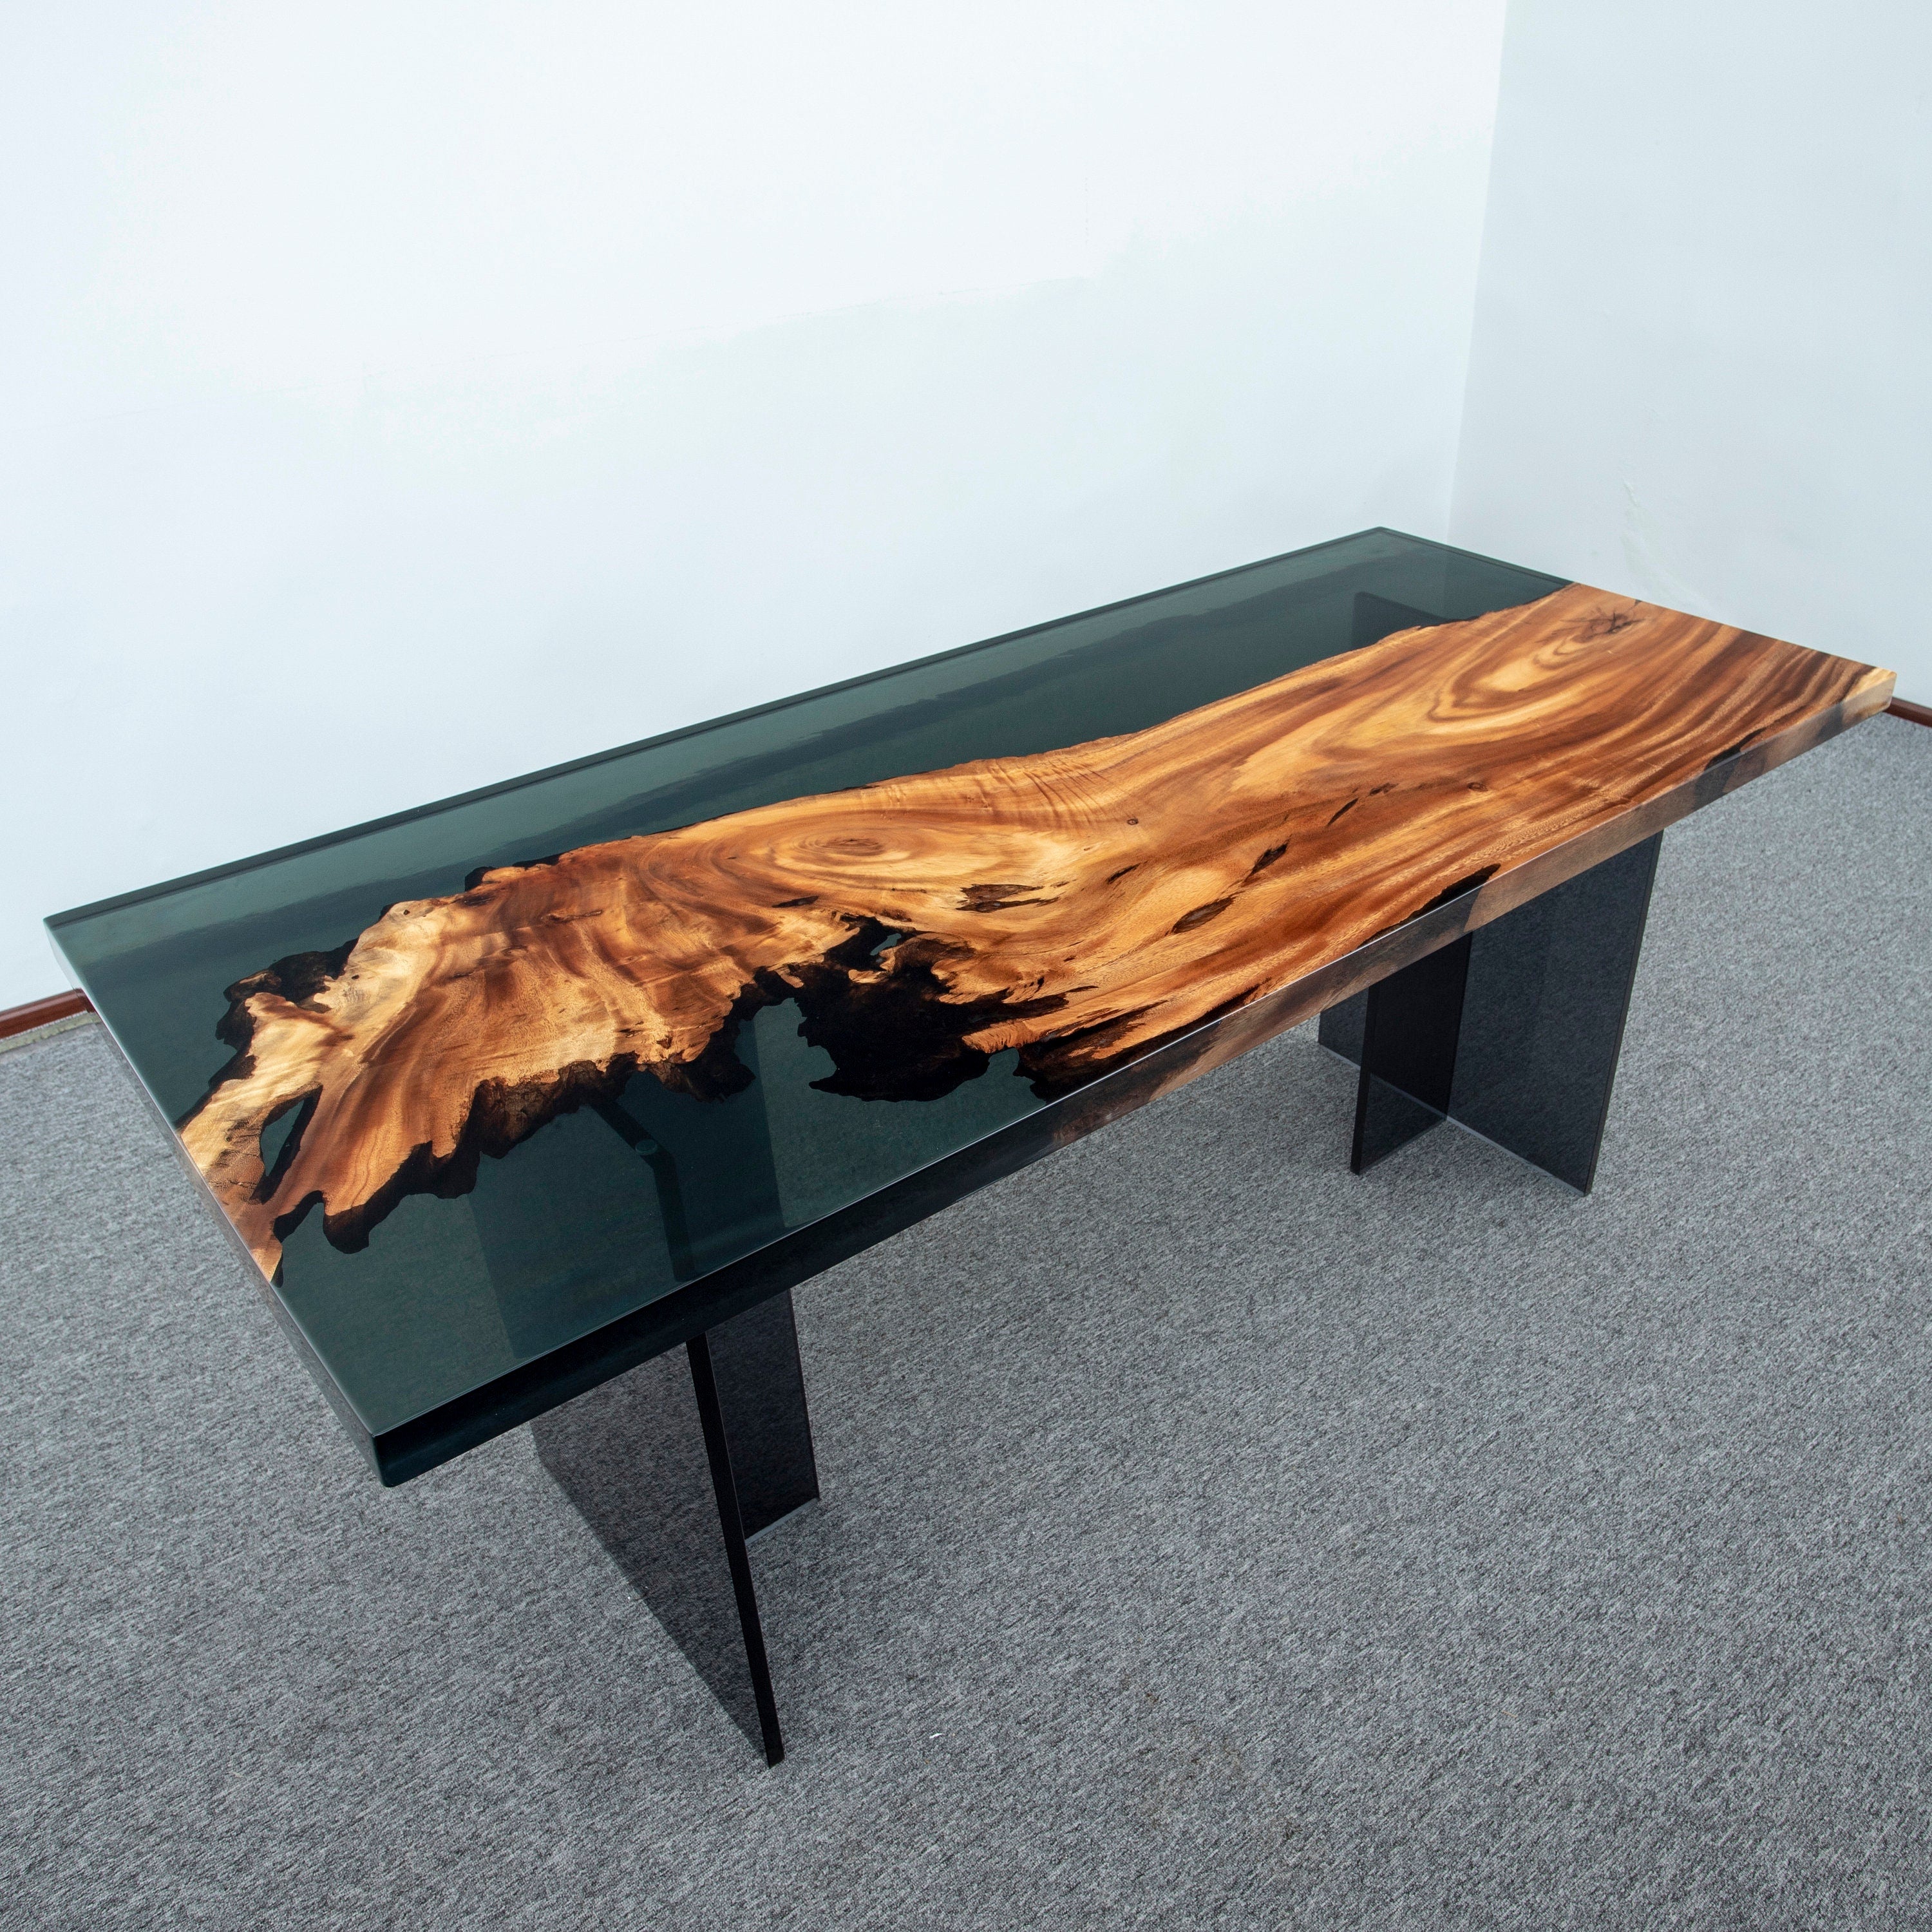 Epoxy Resin Table, Live Edge Epoxy River Table, Dining Room Wood Furniture